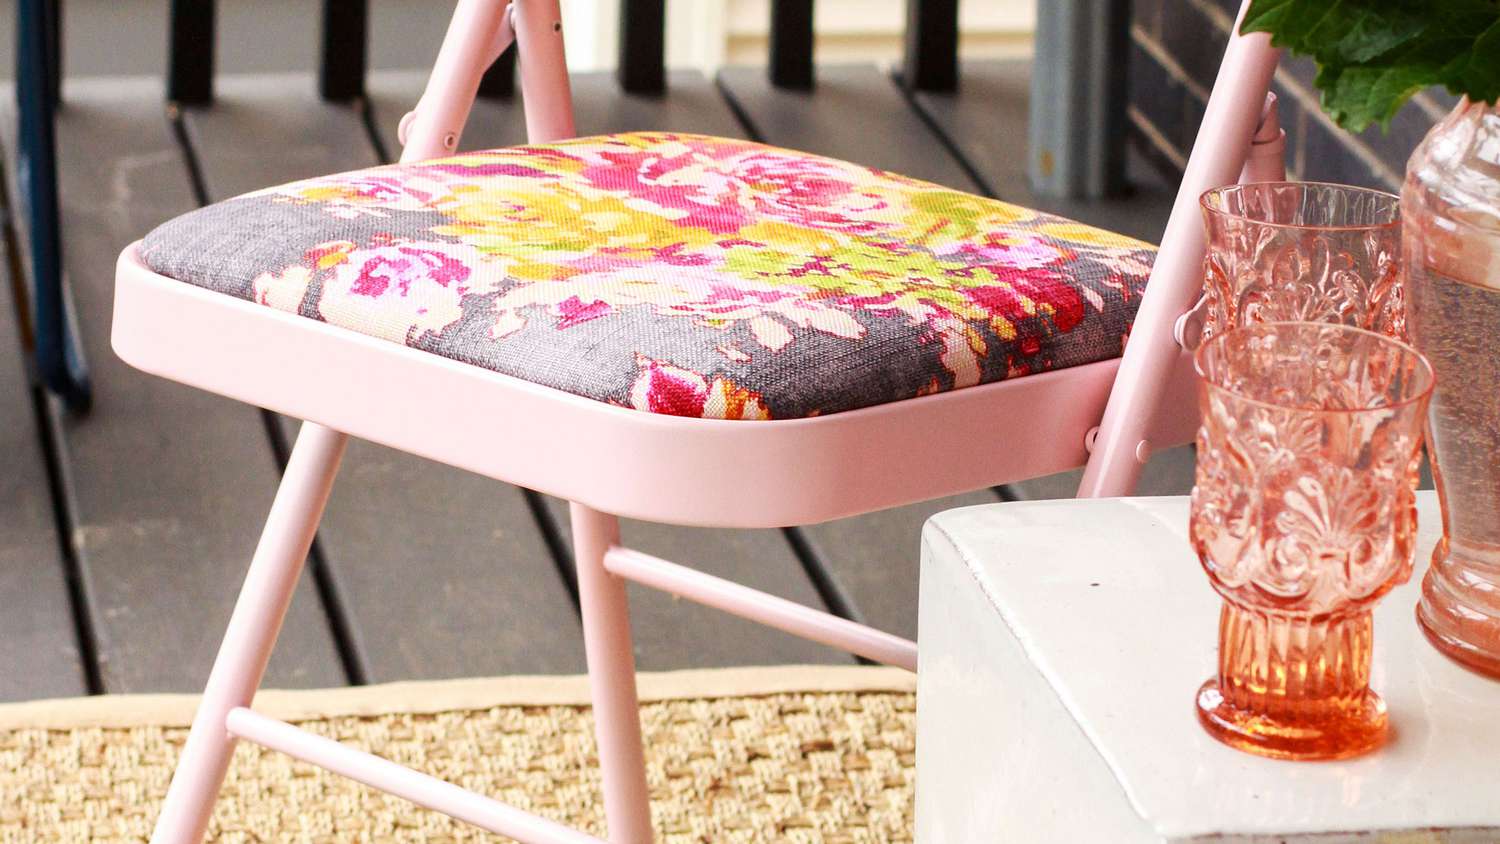 How To Paint And Reupholster An Upcycled Folding Chair Martha